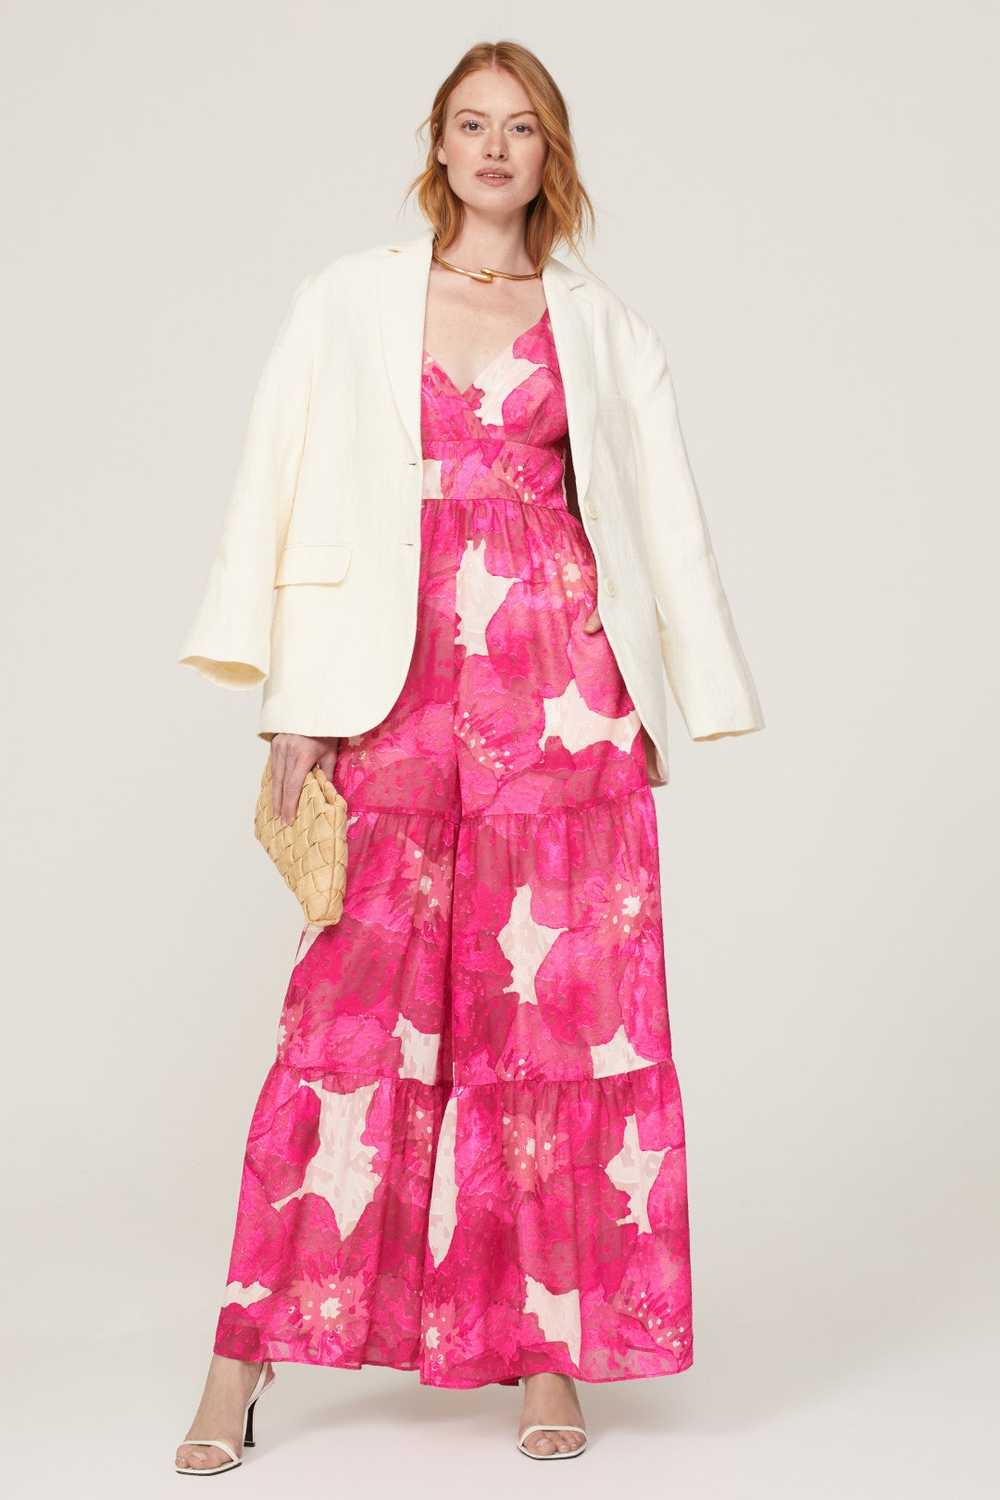 Slate & Willow Pink Floral Jumpsuit - image 1